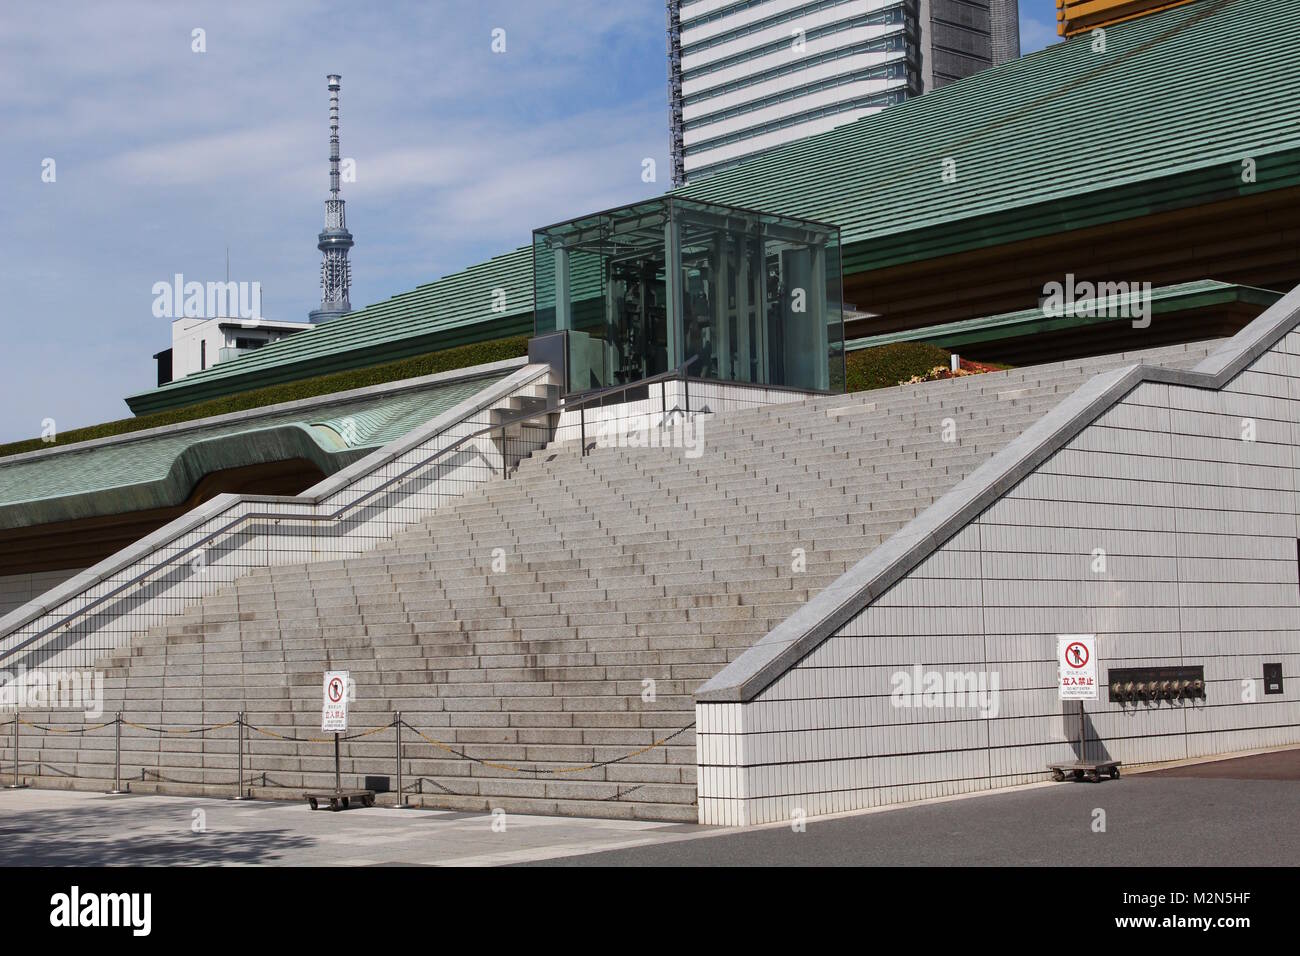 The Ryogoku Kokugikan, a sporting arena mainly used for sumo with Tokyo Skytree in the background. It will be used as a venue in the 2020 Olympics. Stock Photo